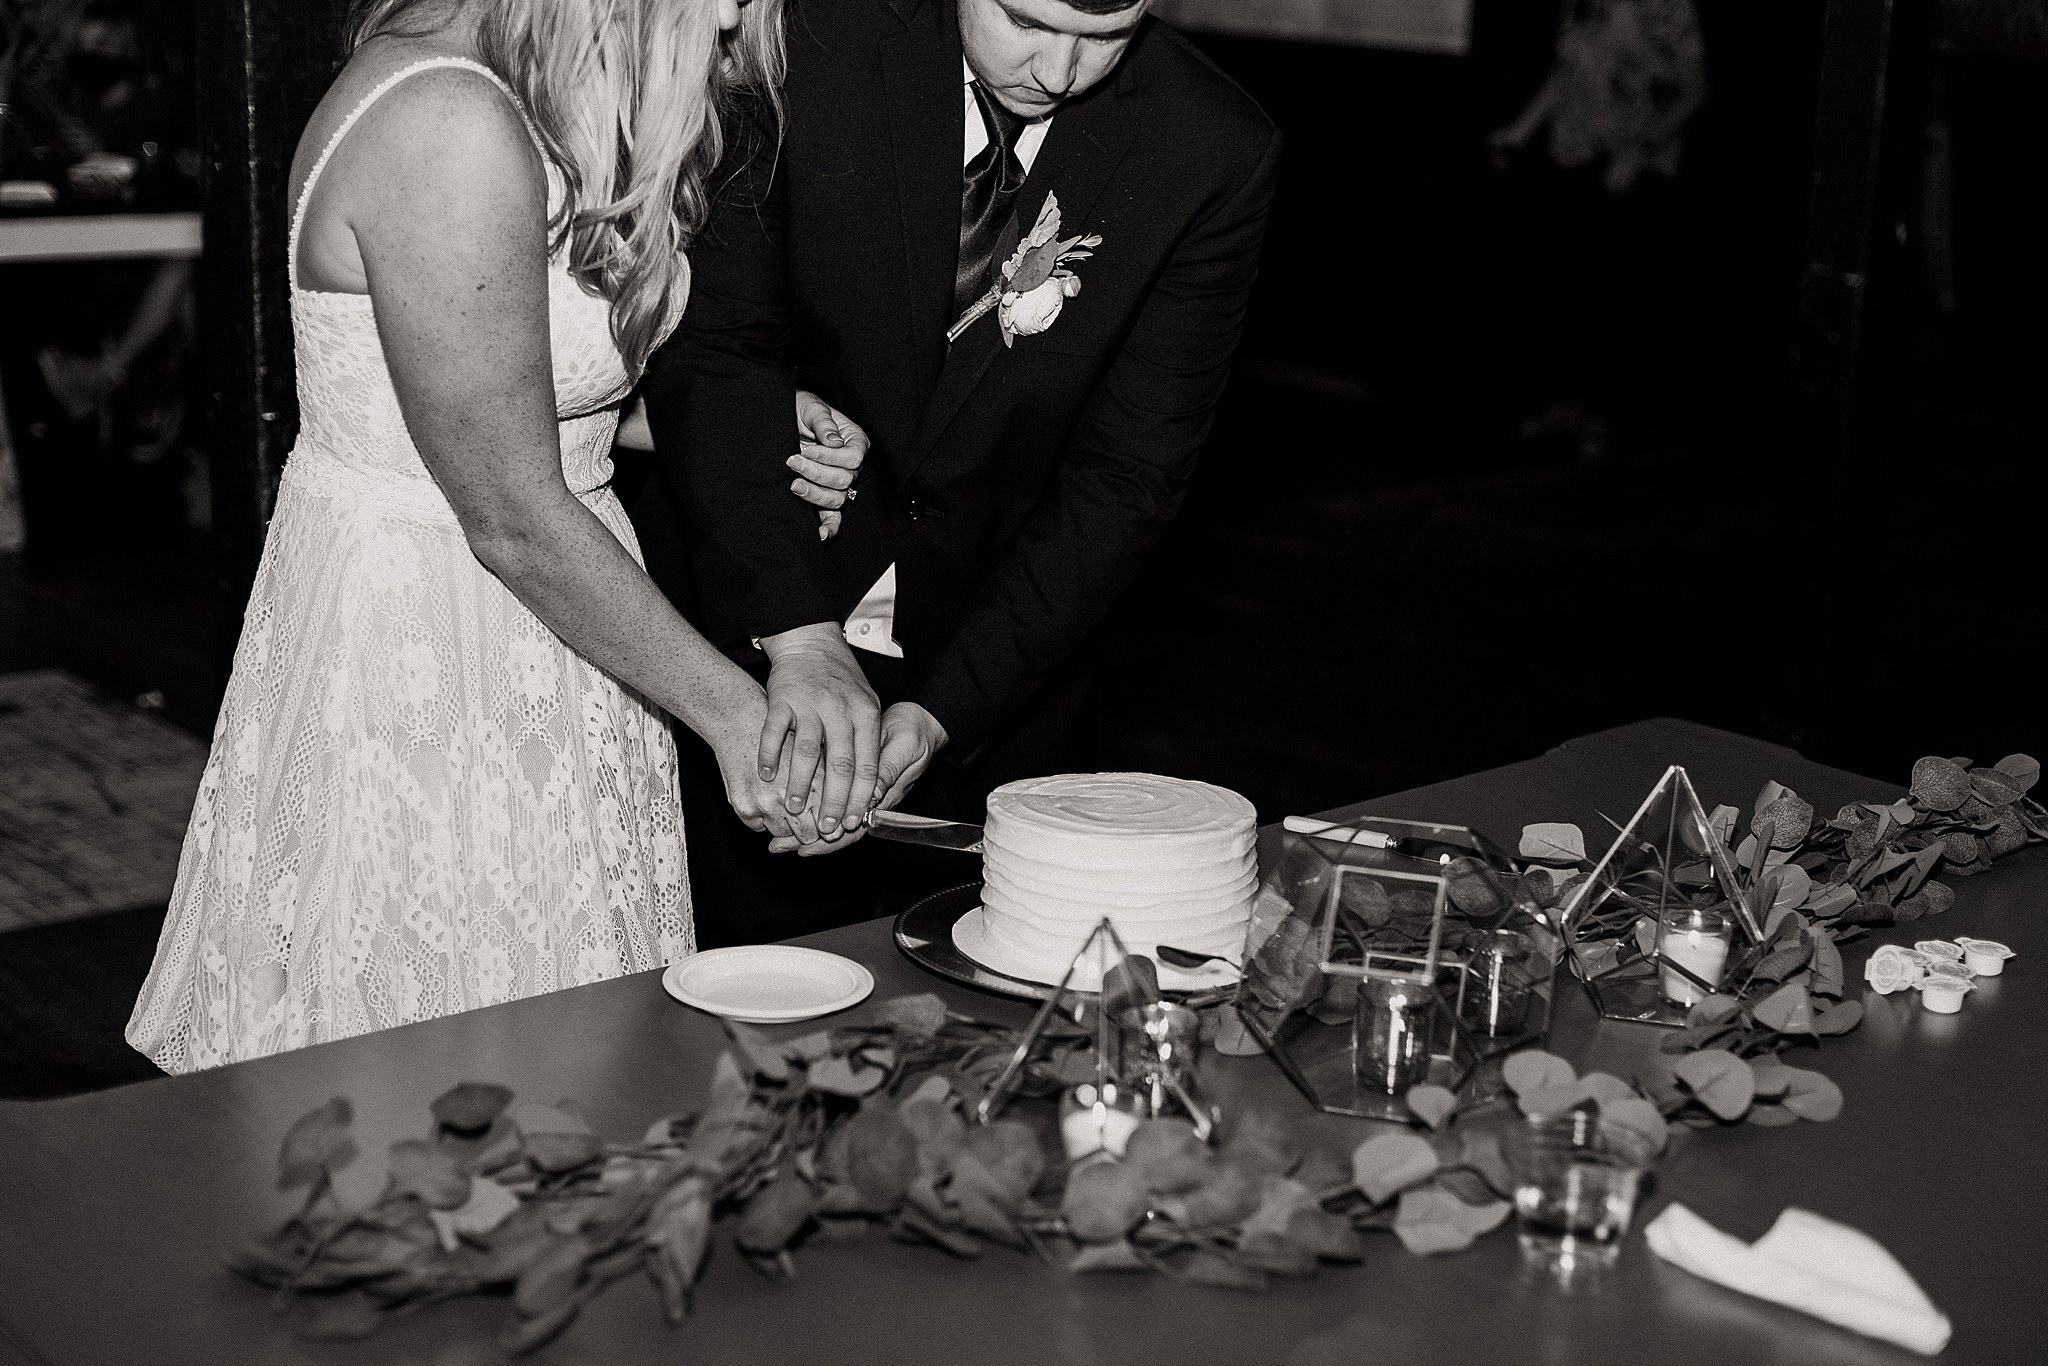 Bride and Groom Cutting Cake